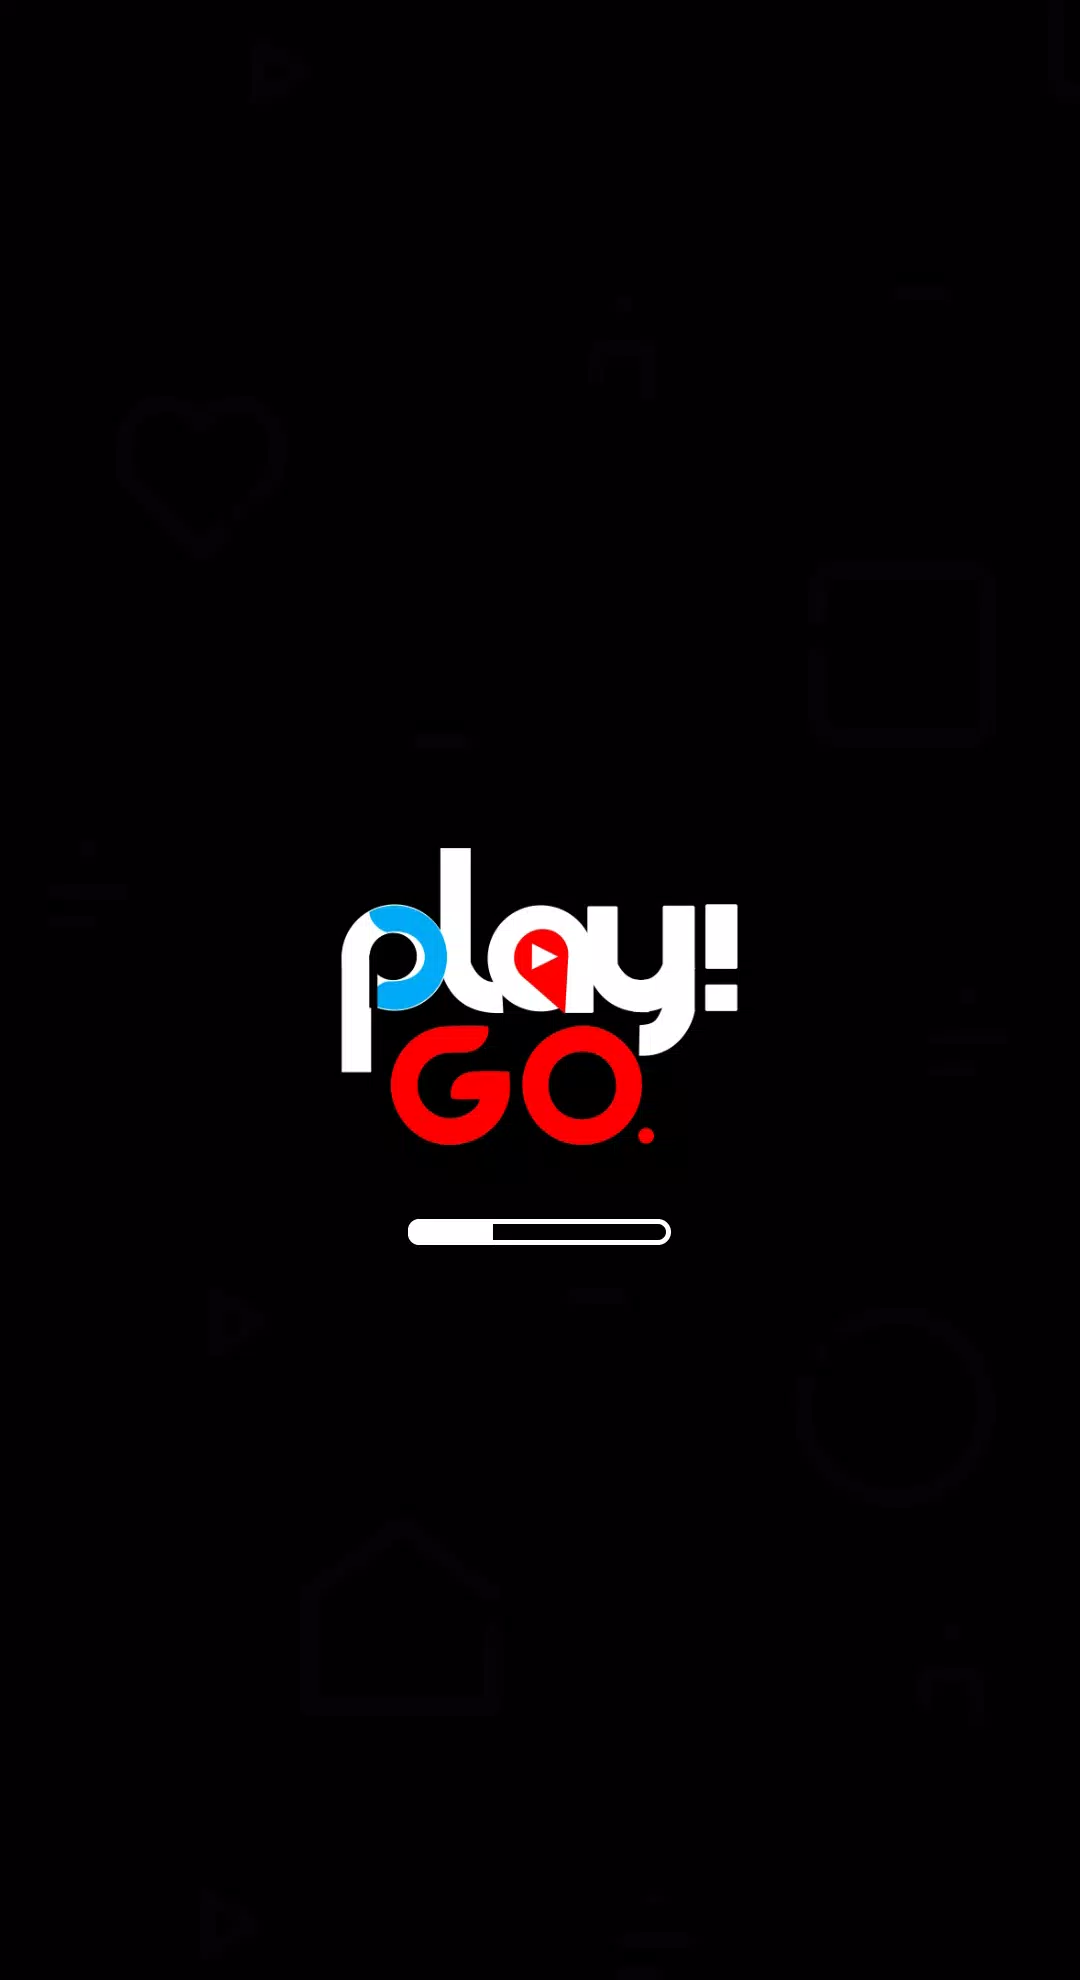 Play! Go. for Android - APK Download